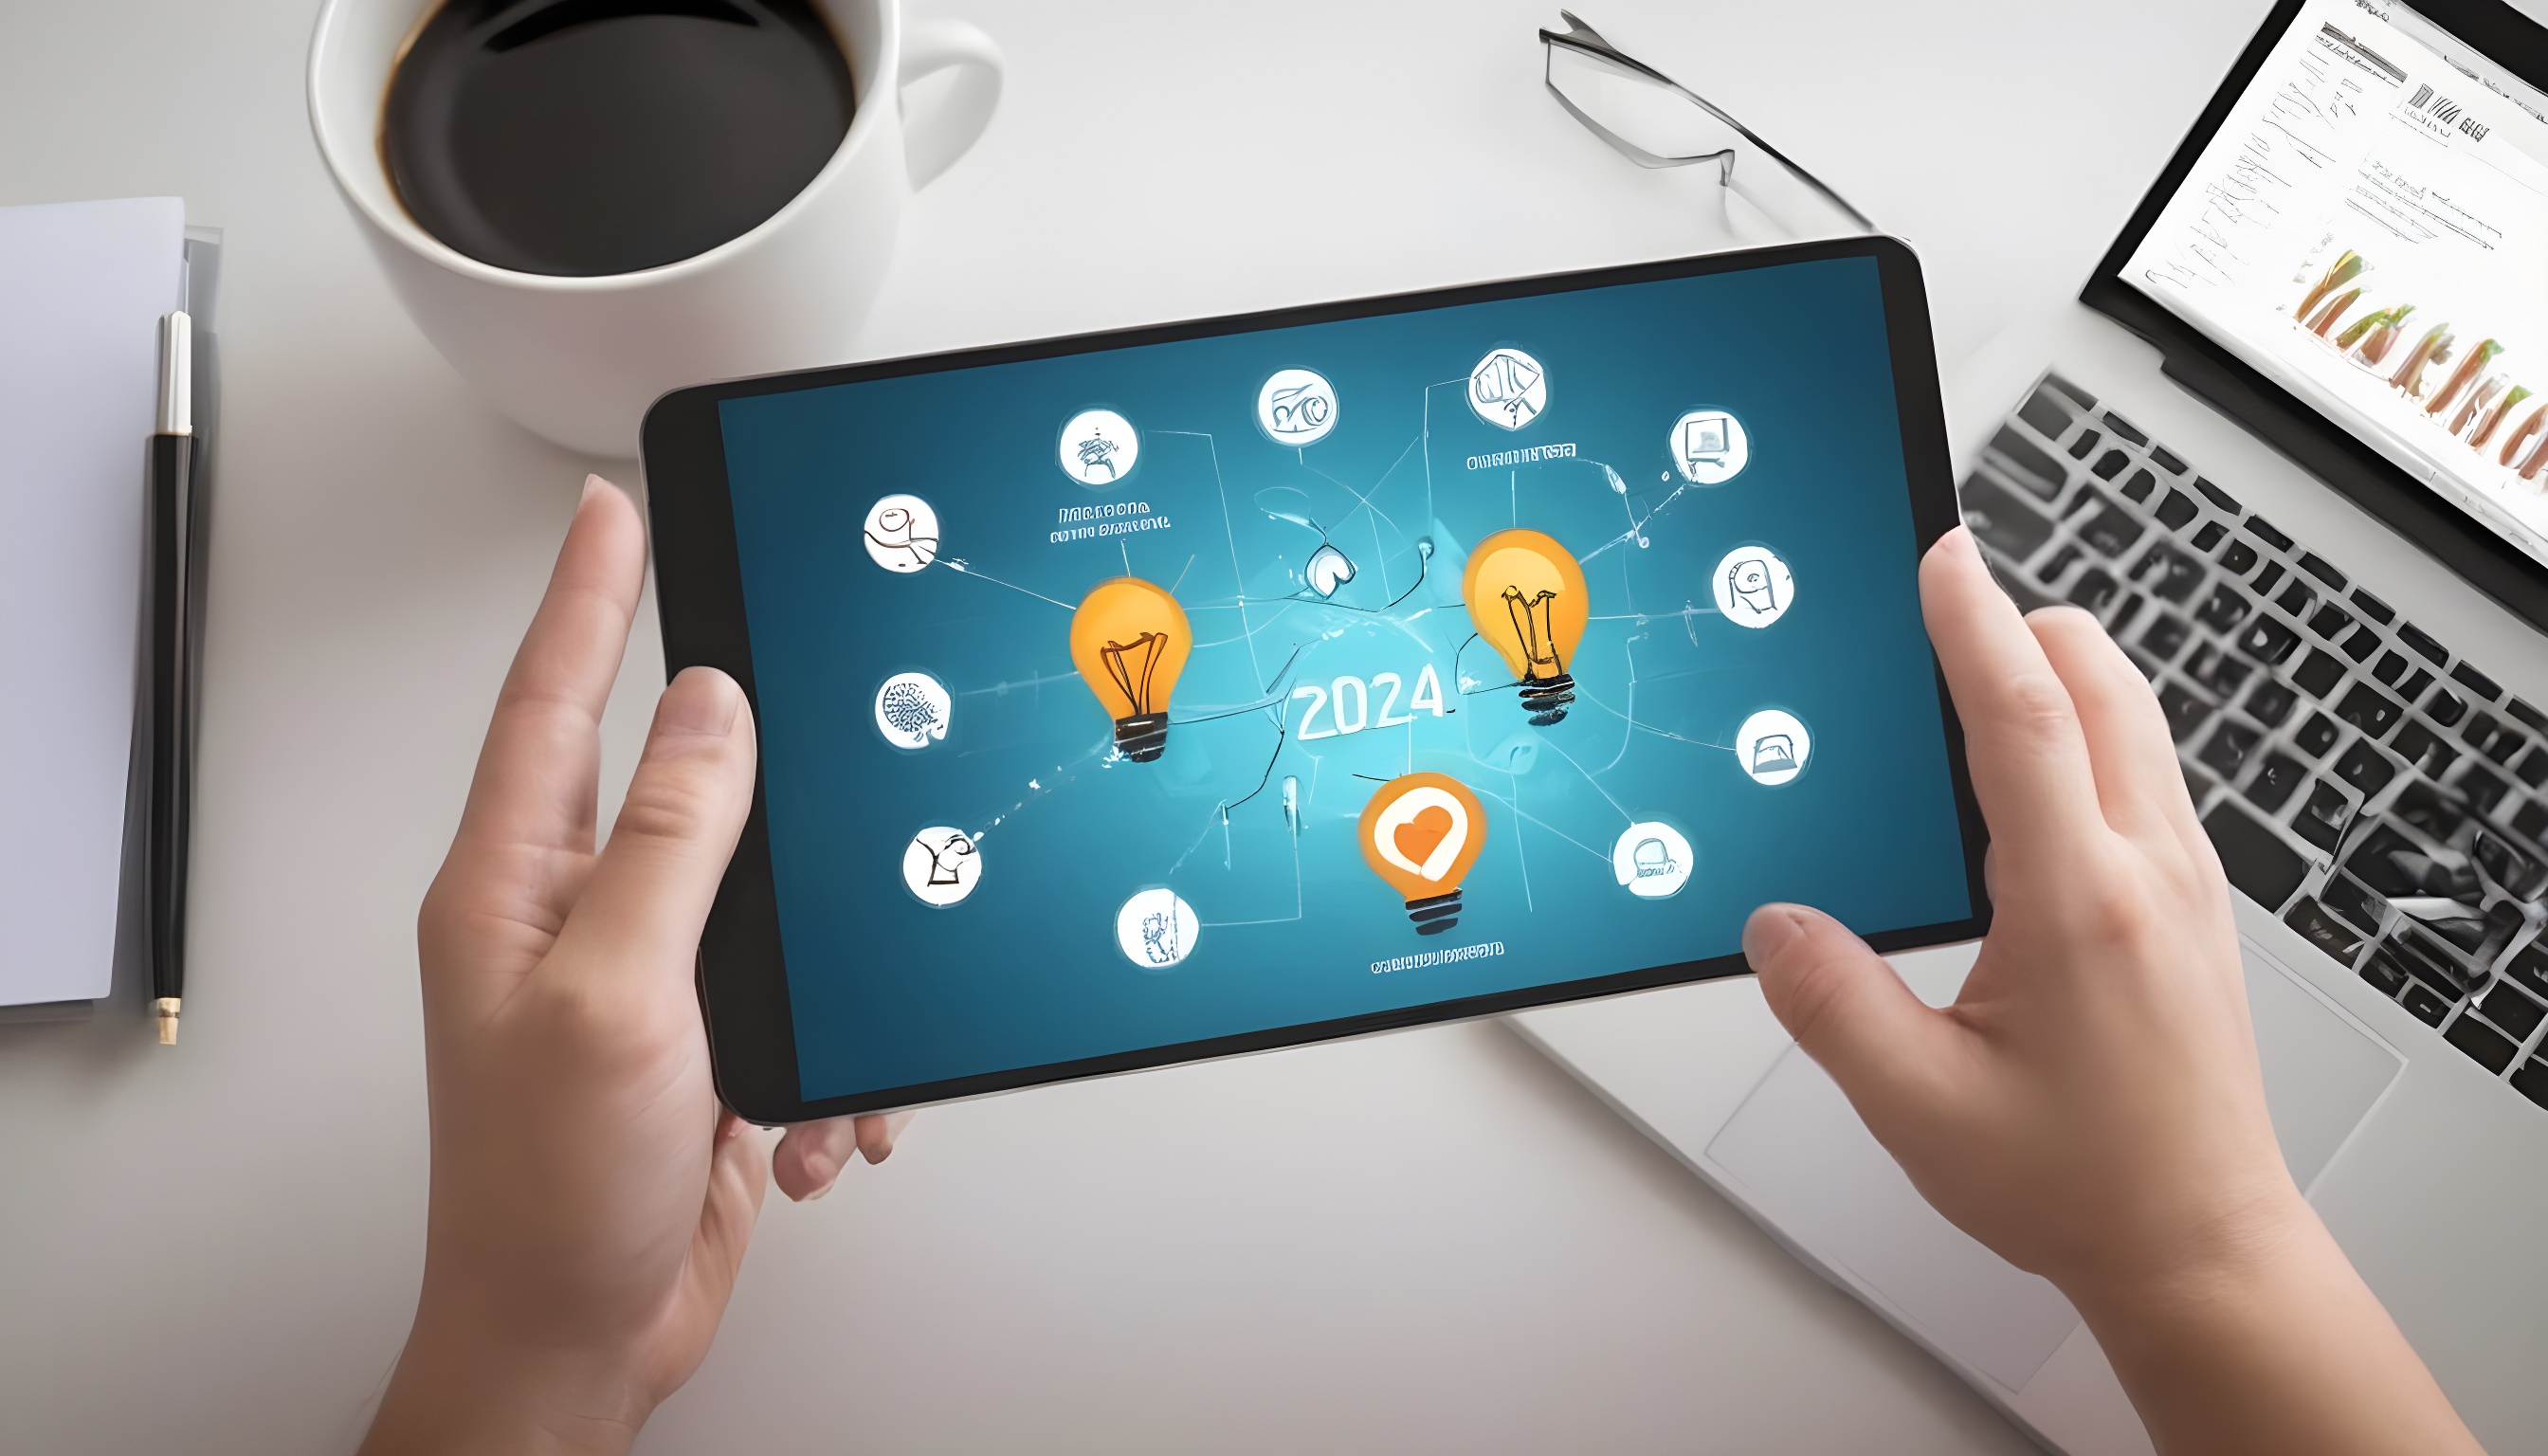 10 Most Innovative Application Ideas to Consider Developing in 2024 